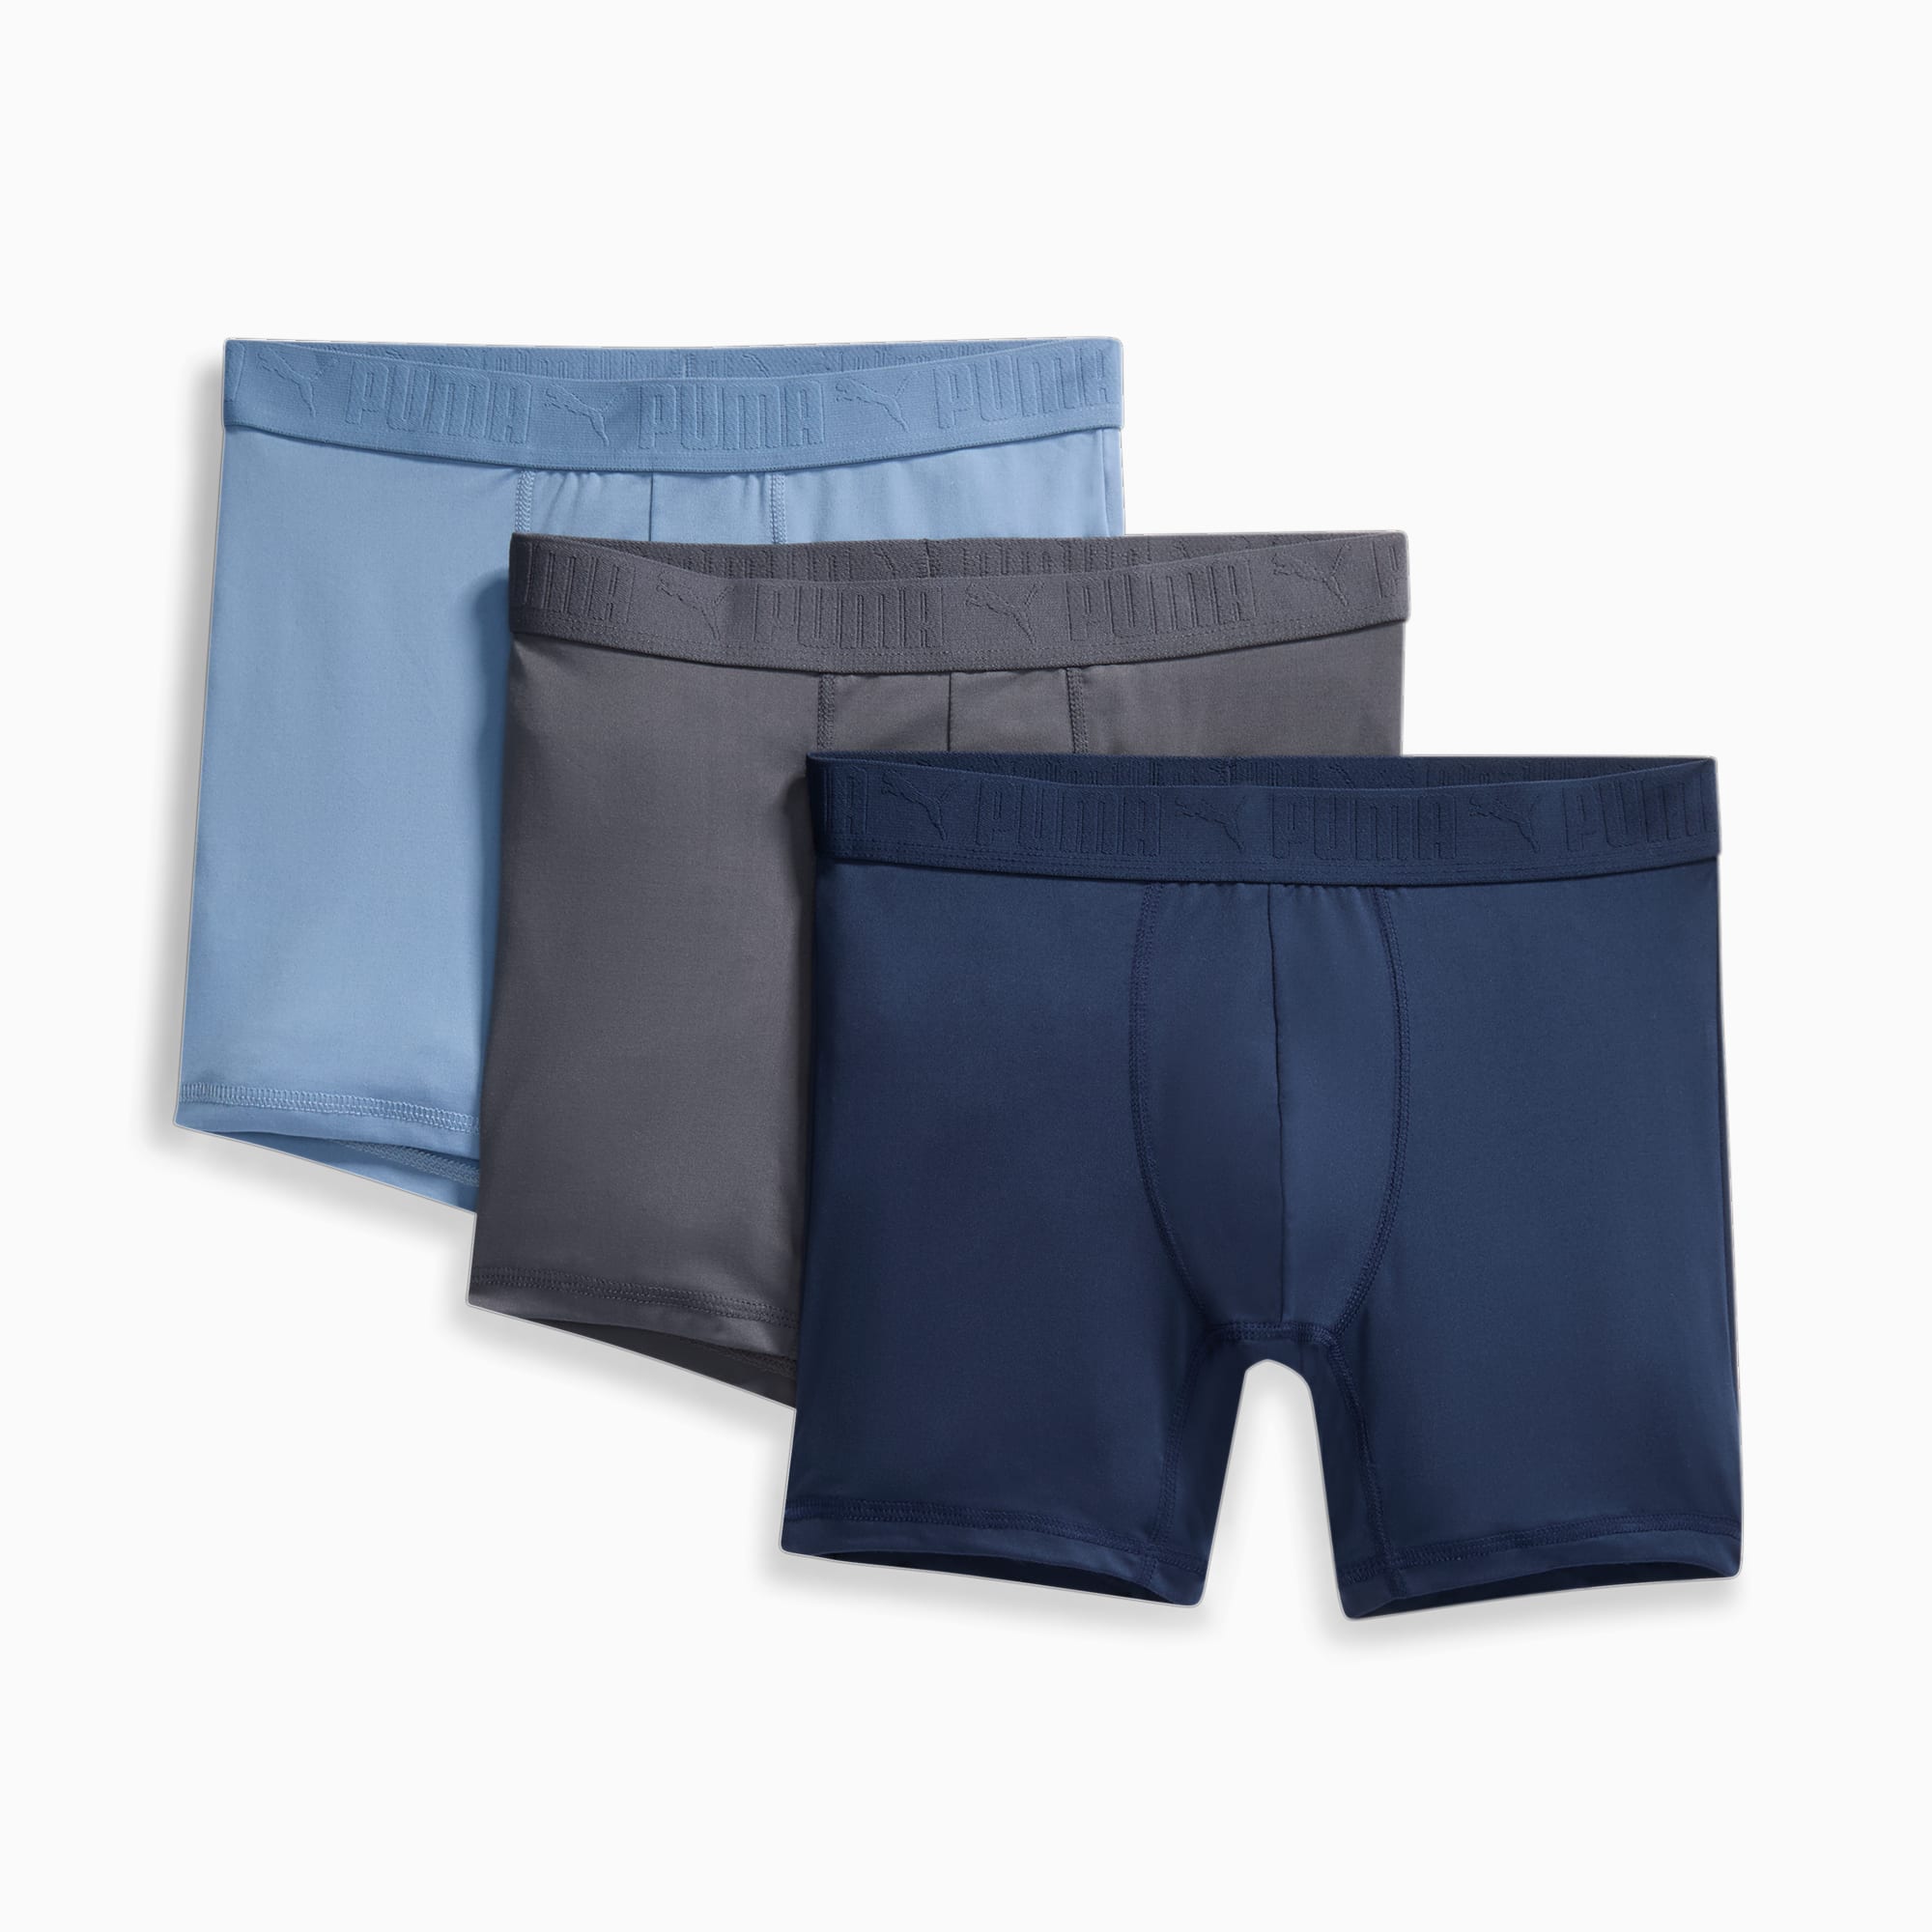 3 PACK OF BASIC BOXERS - Navy blue